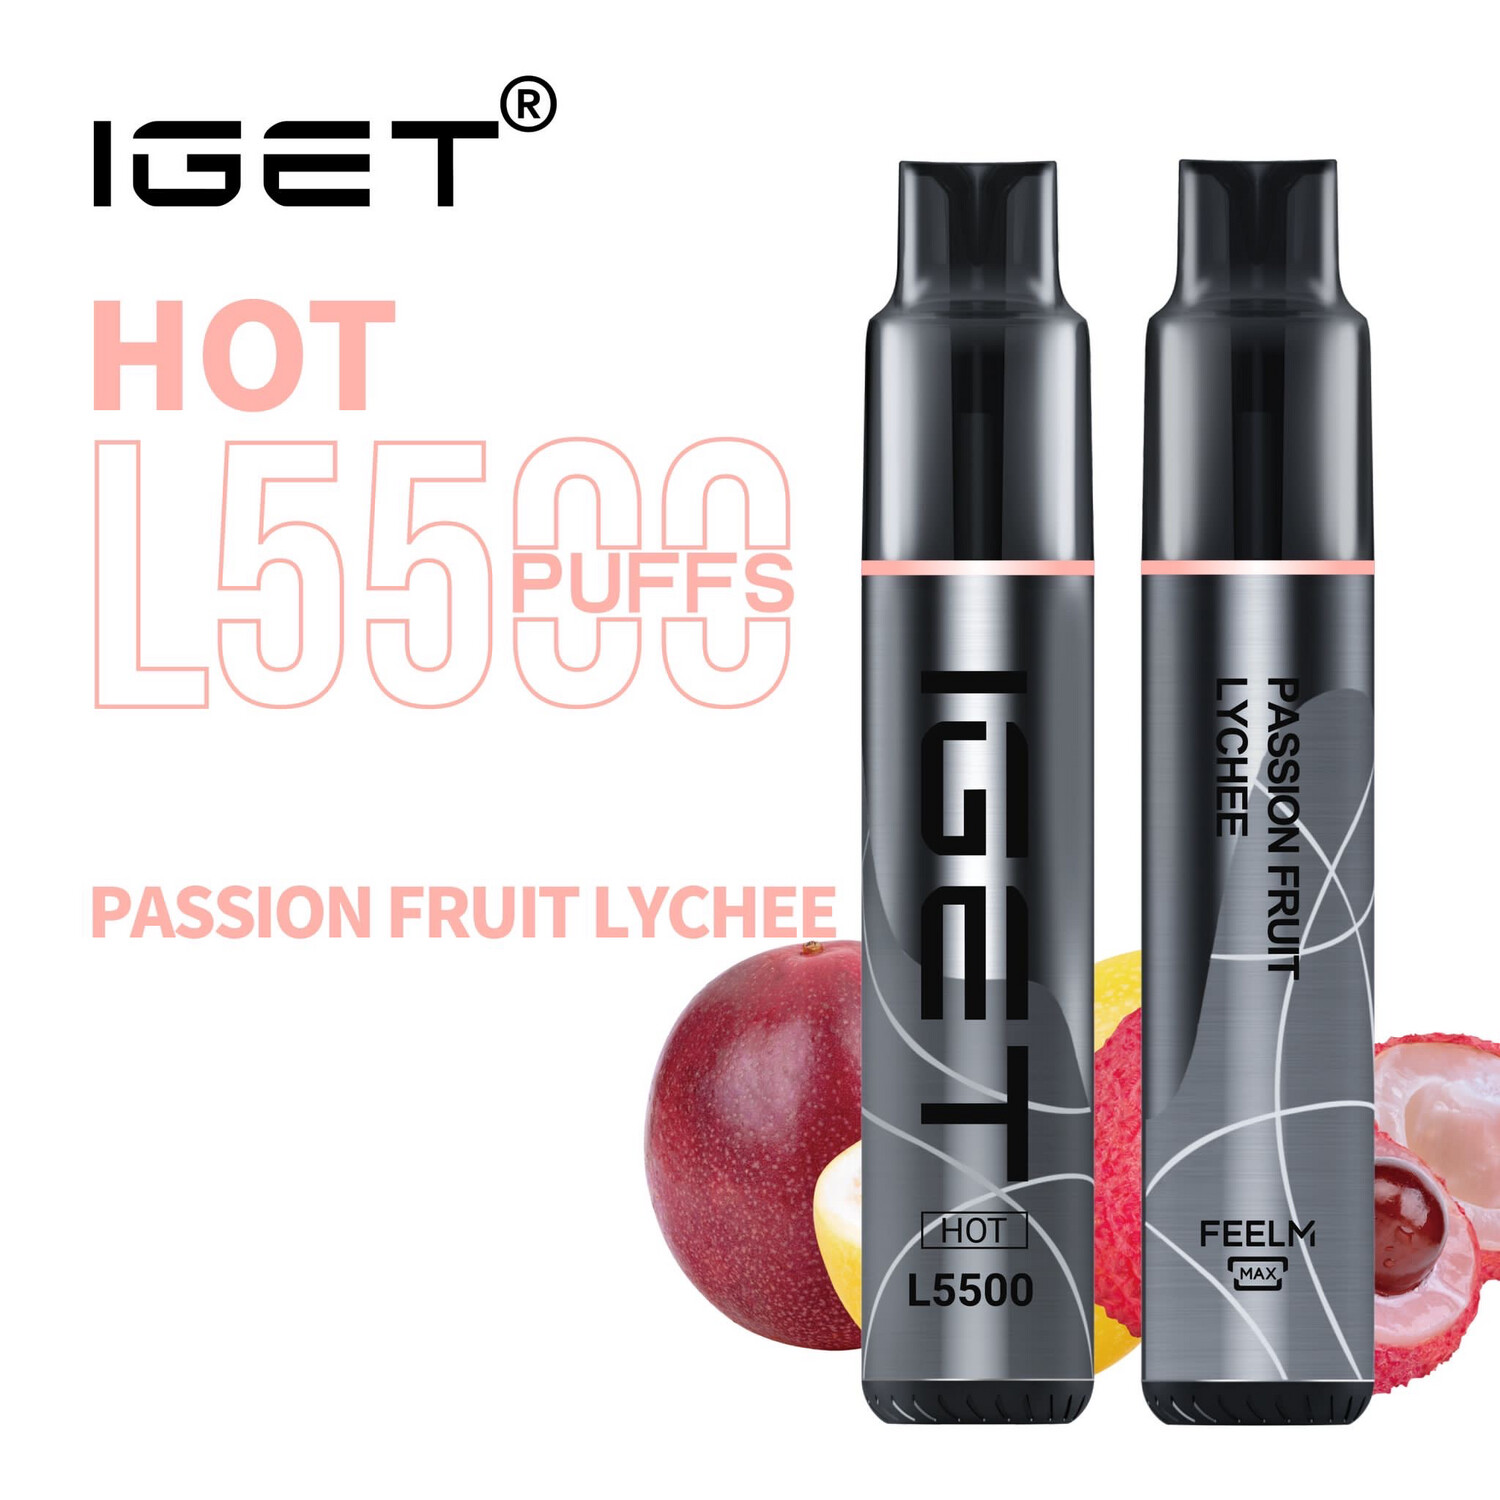 IGET PASSION FRUIT LYCHEE 5500 PUFFS